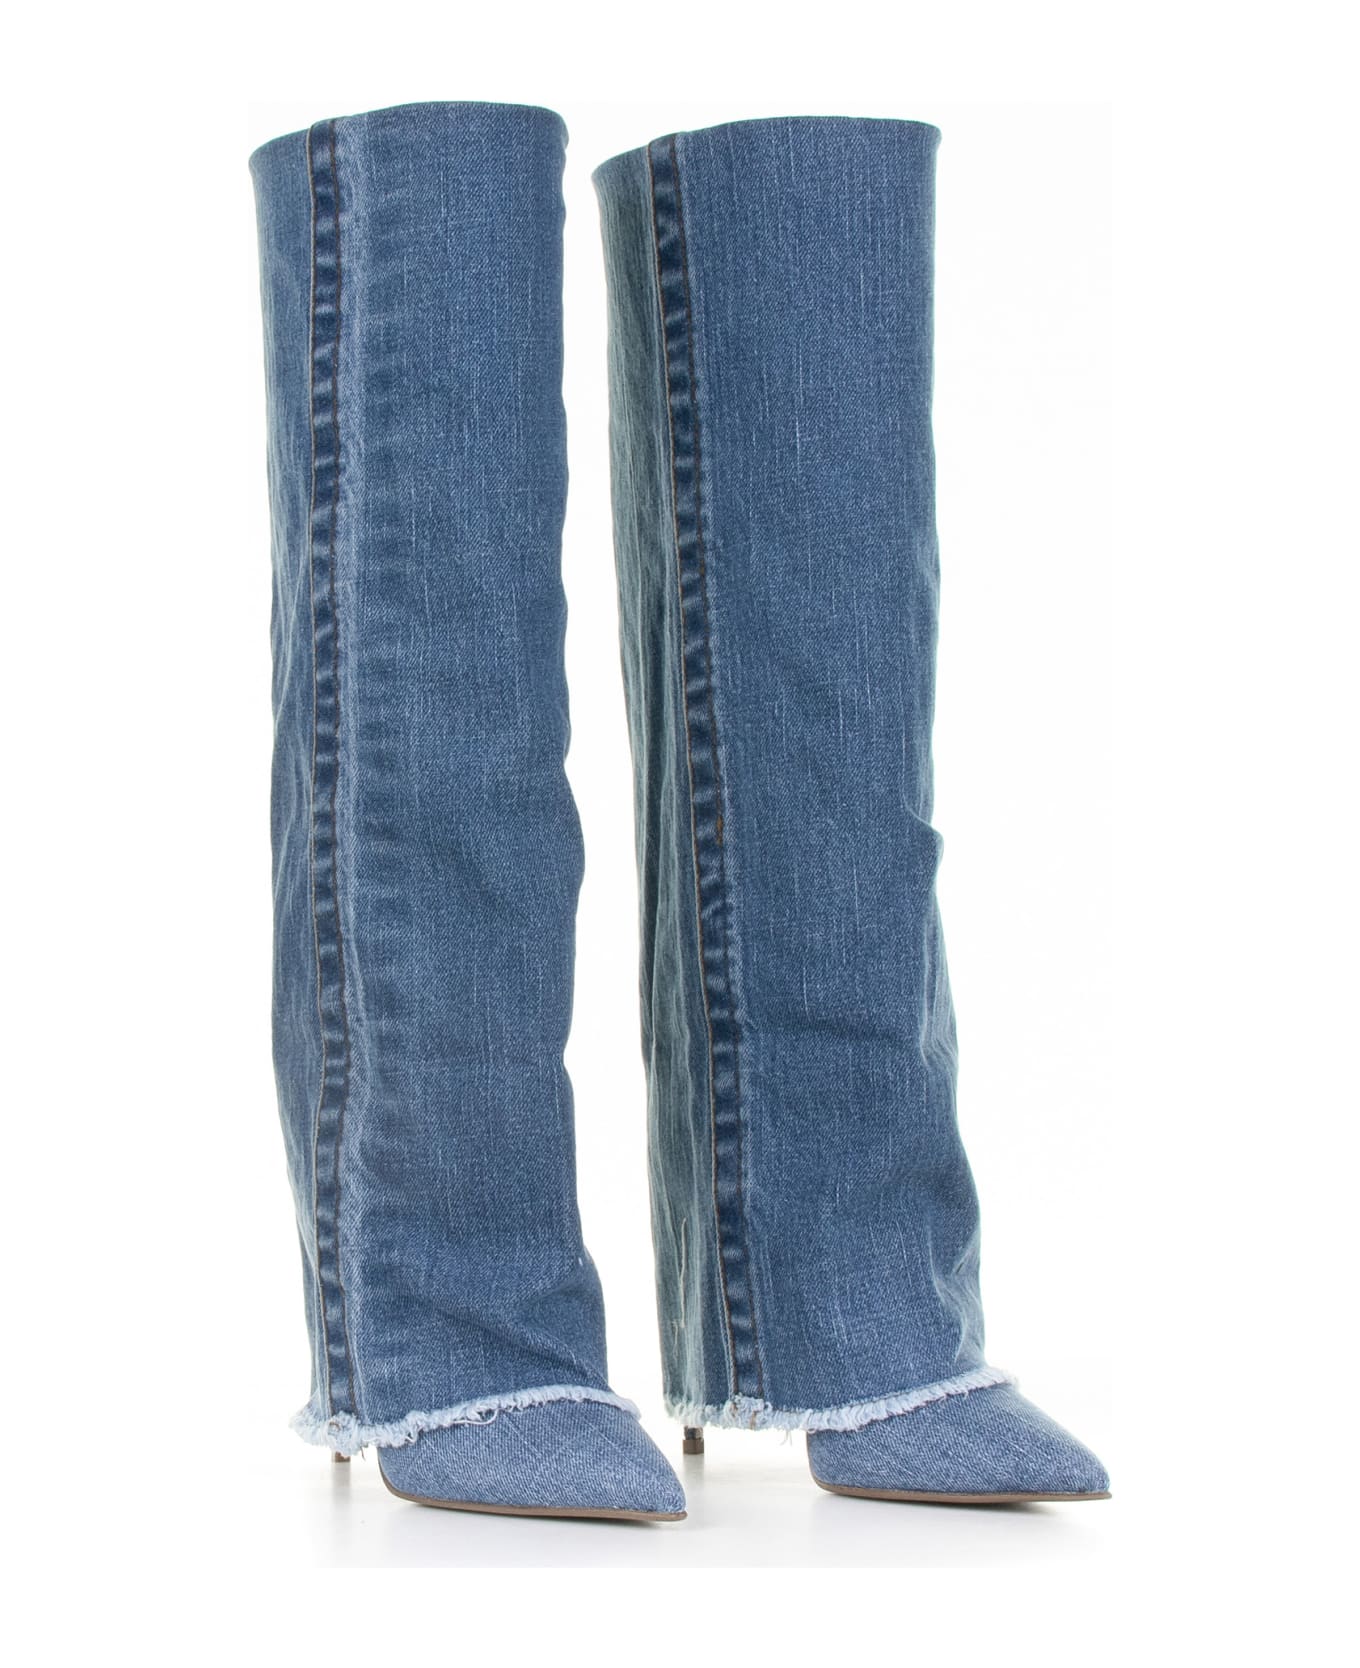 Le Silla Andy Boot With Cuff In Blue Denim - JEANS ブーツ